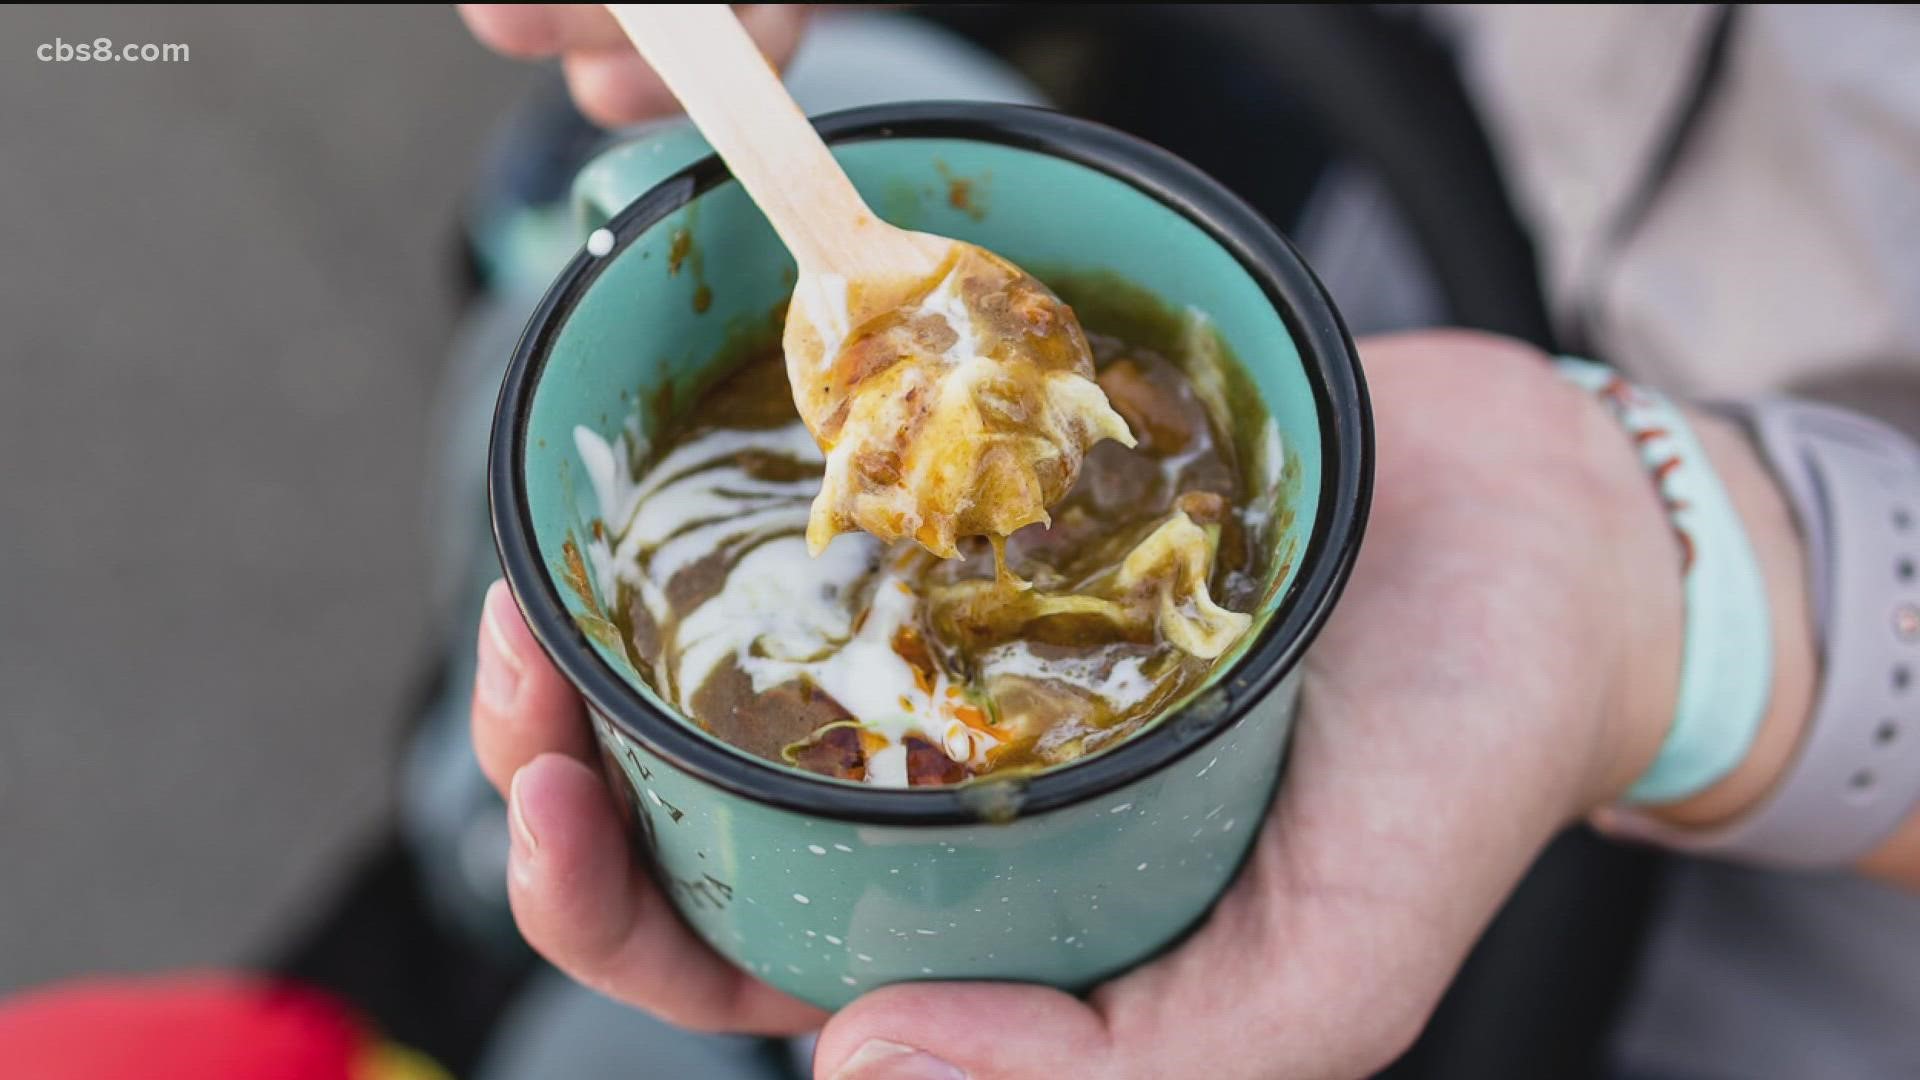 The 12th Annual SoNo Fest & Chili Cook-Off is Sunday, December 5, starting at 11 a.m. to 5 p.m. at 32nd Street & Thorn Street in North Park, San Diego.